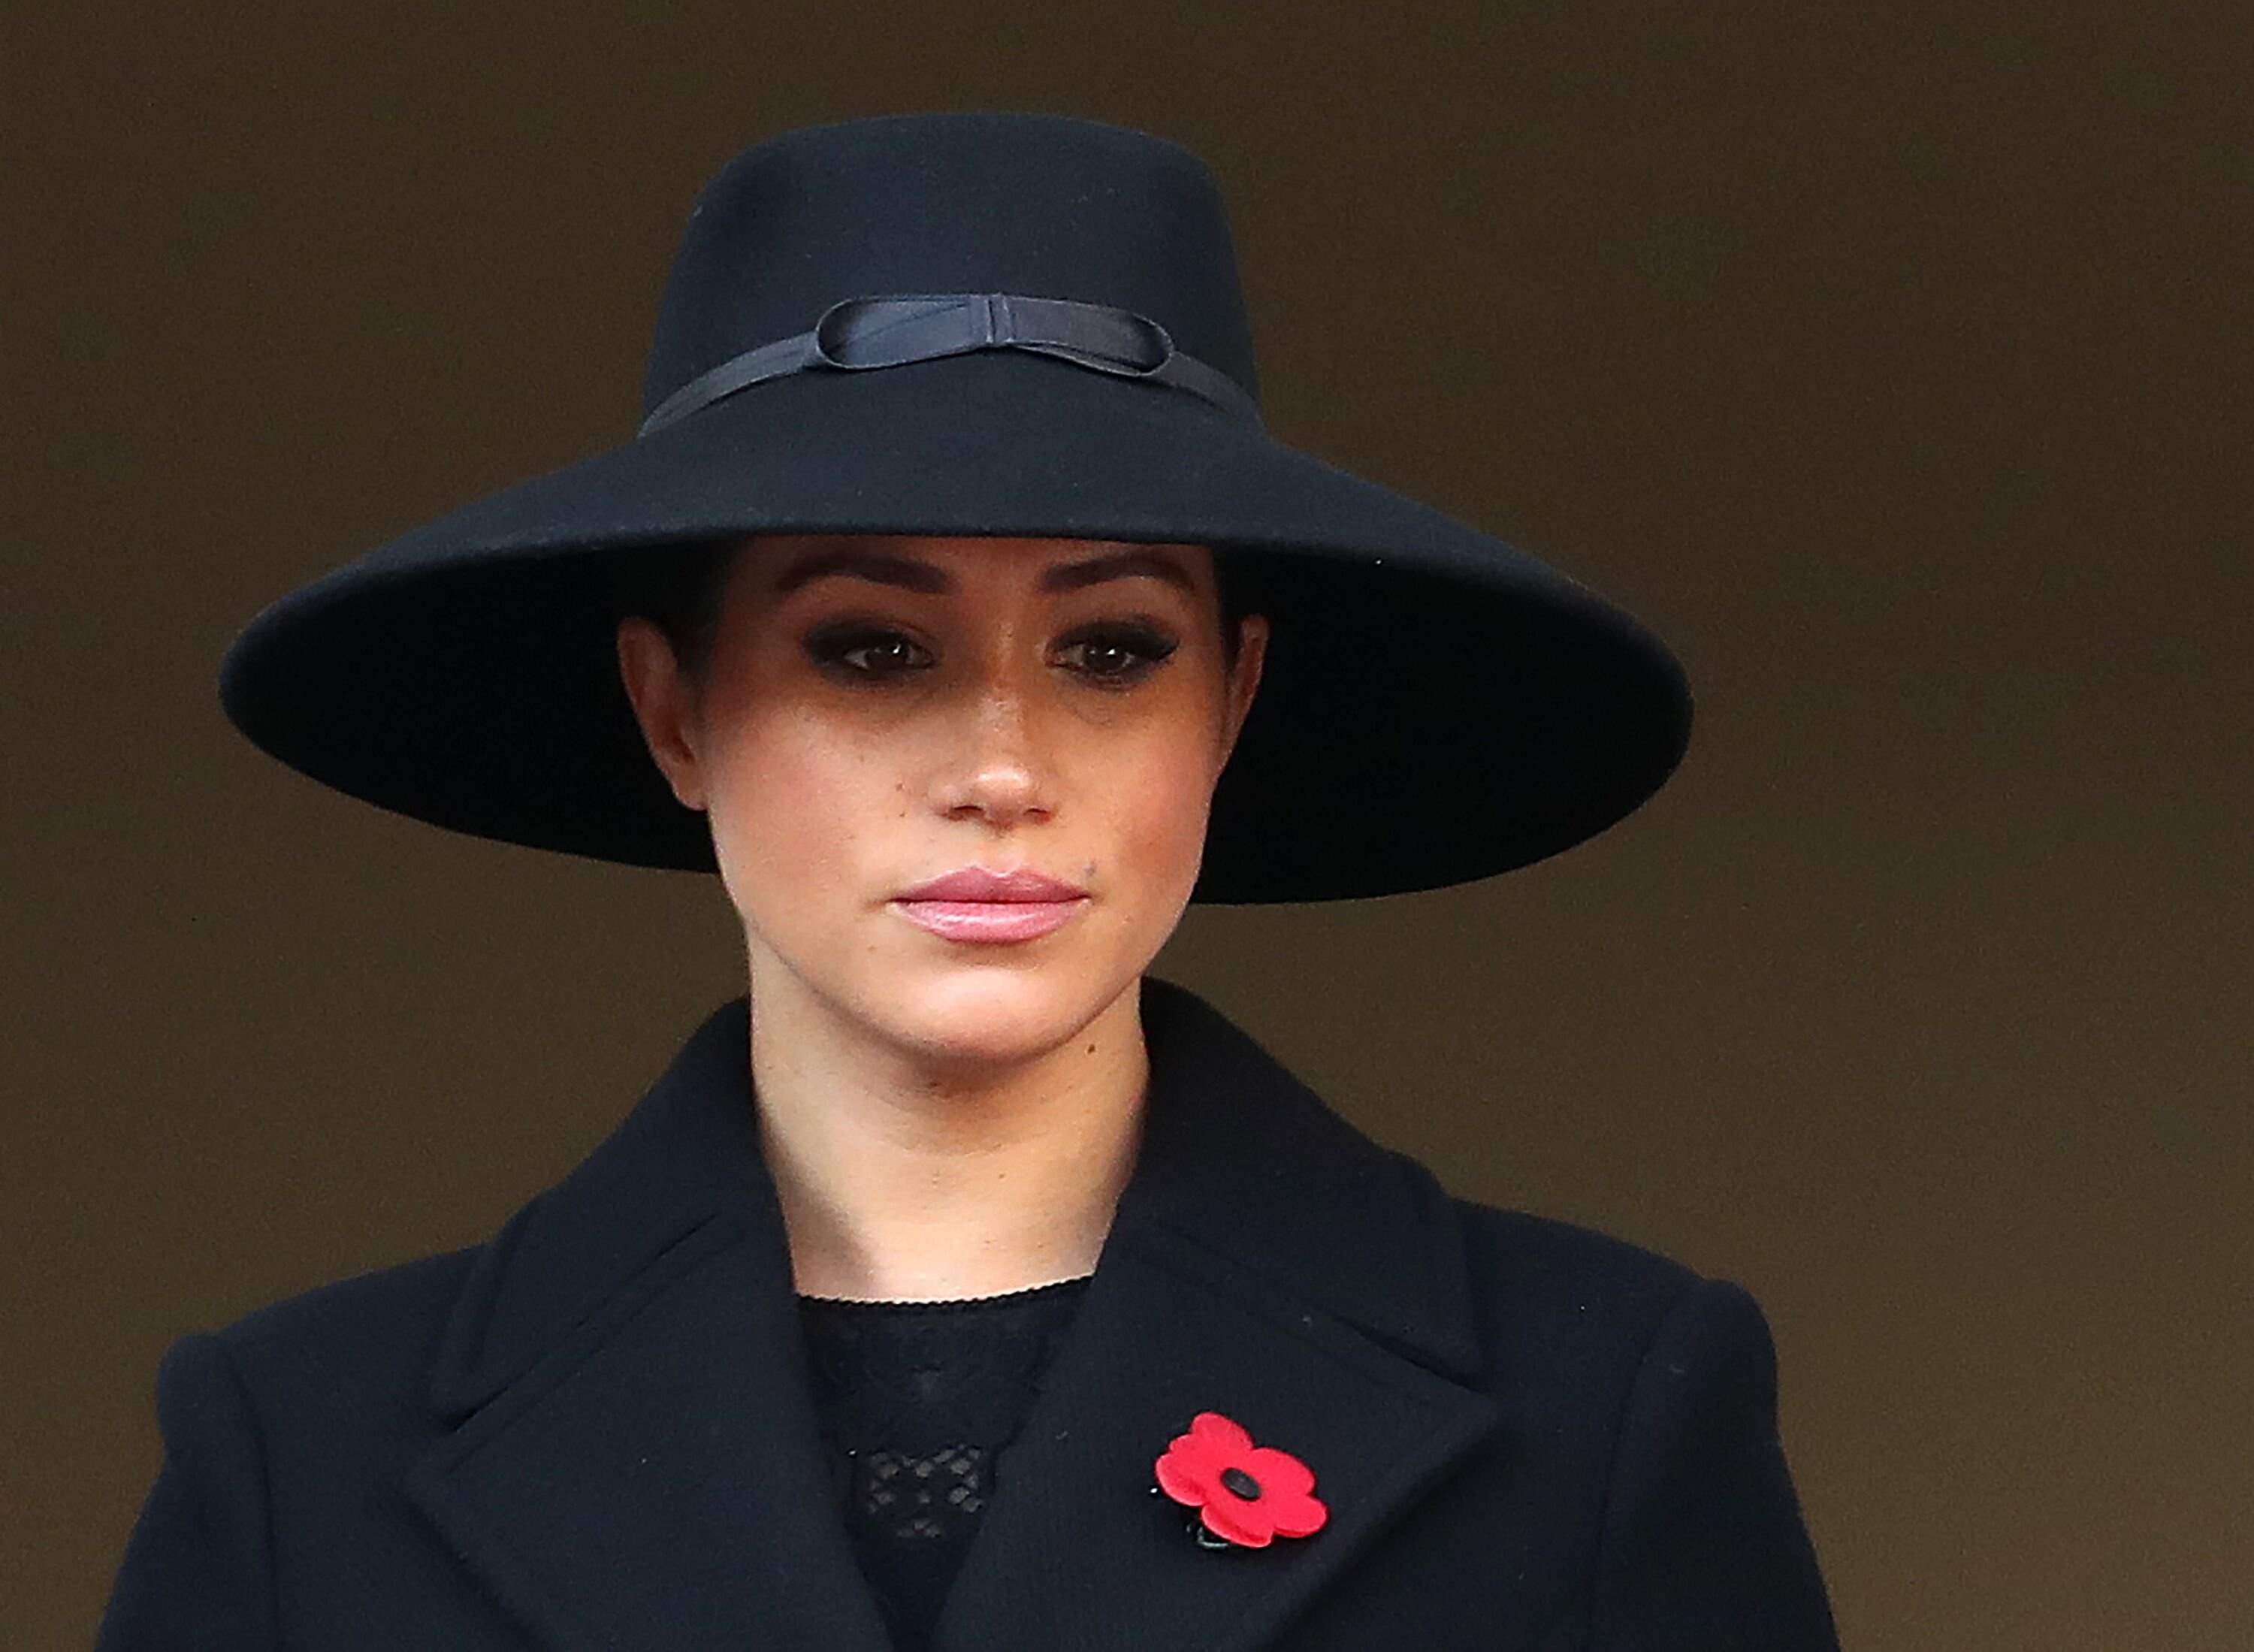 Meghan Markle at the annual Remembrance Sunday memorial on November 10, 2019, in London, England. | Source: Getty Images